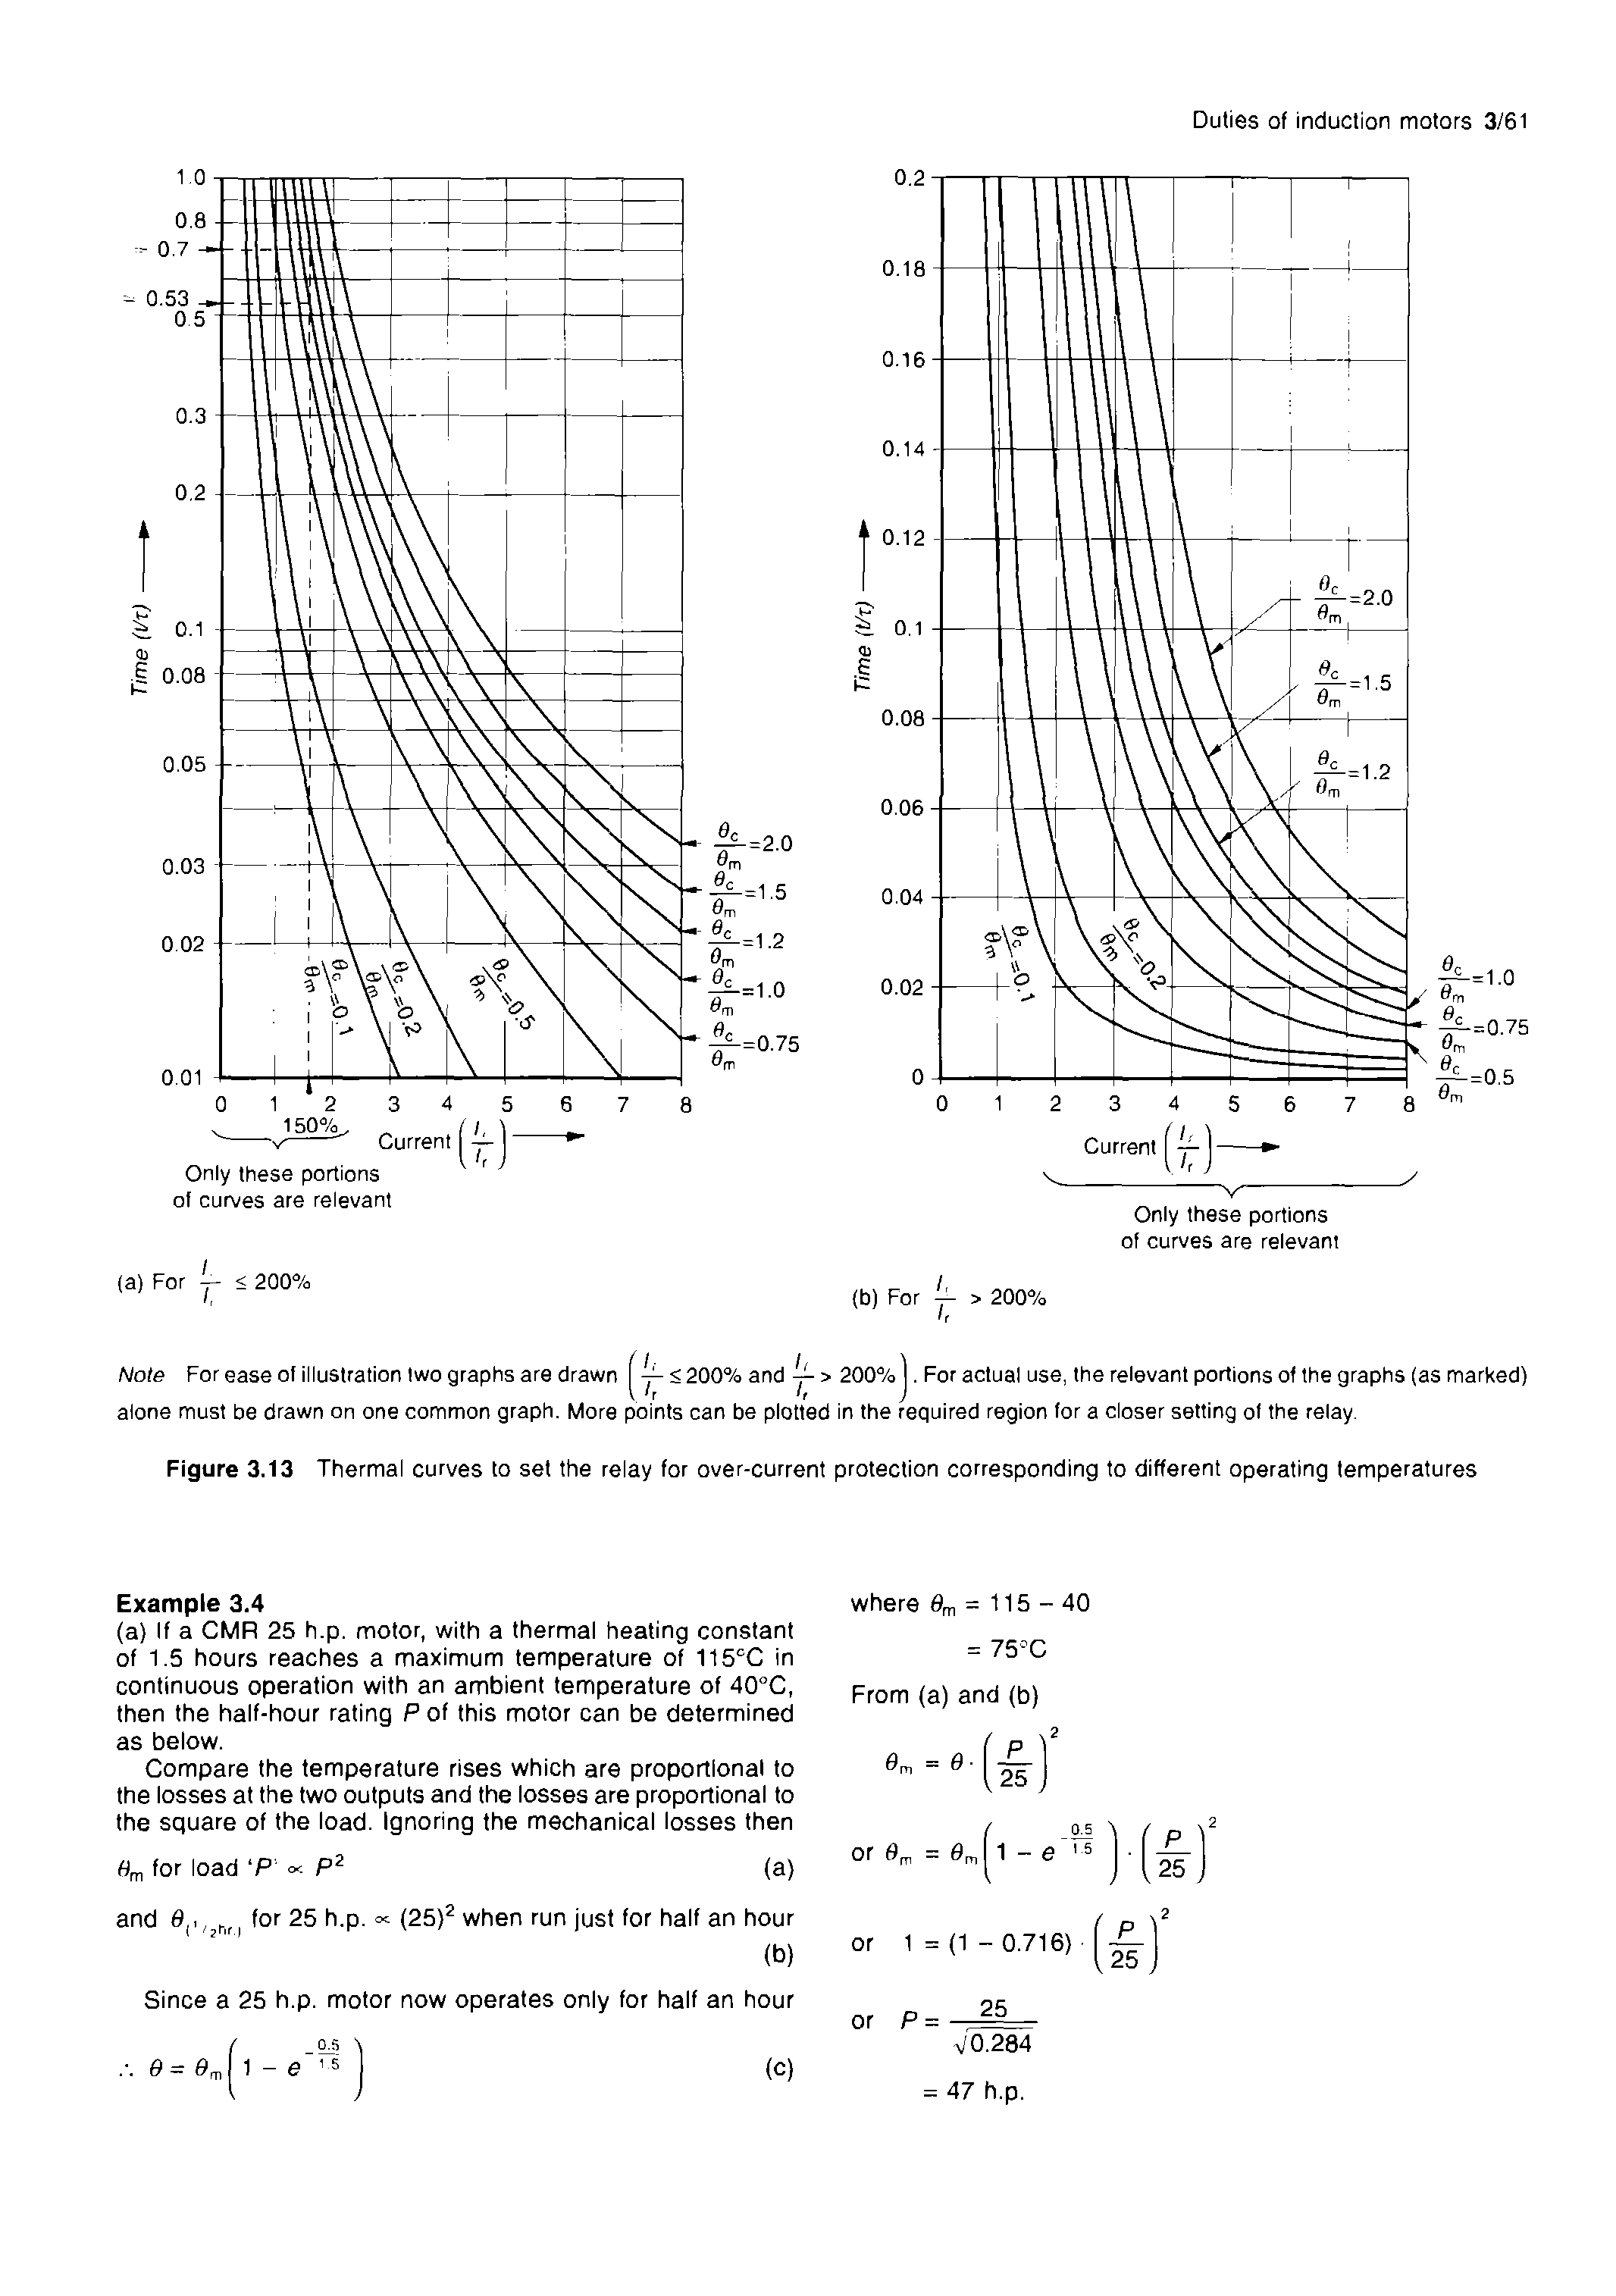 Figure 3.13 Thermal curves to set the relay for over-current protection corresponding to different operating temperatures...